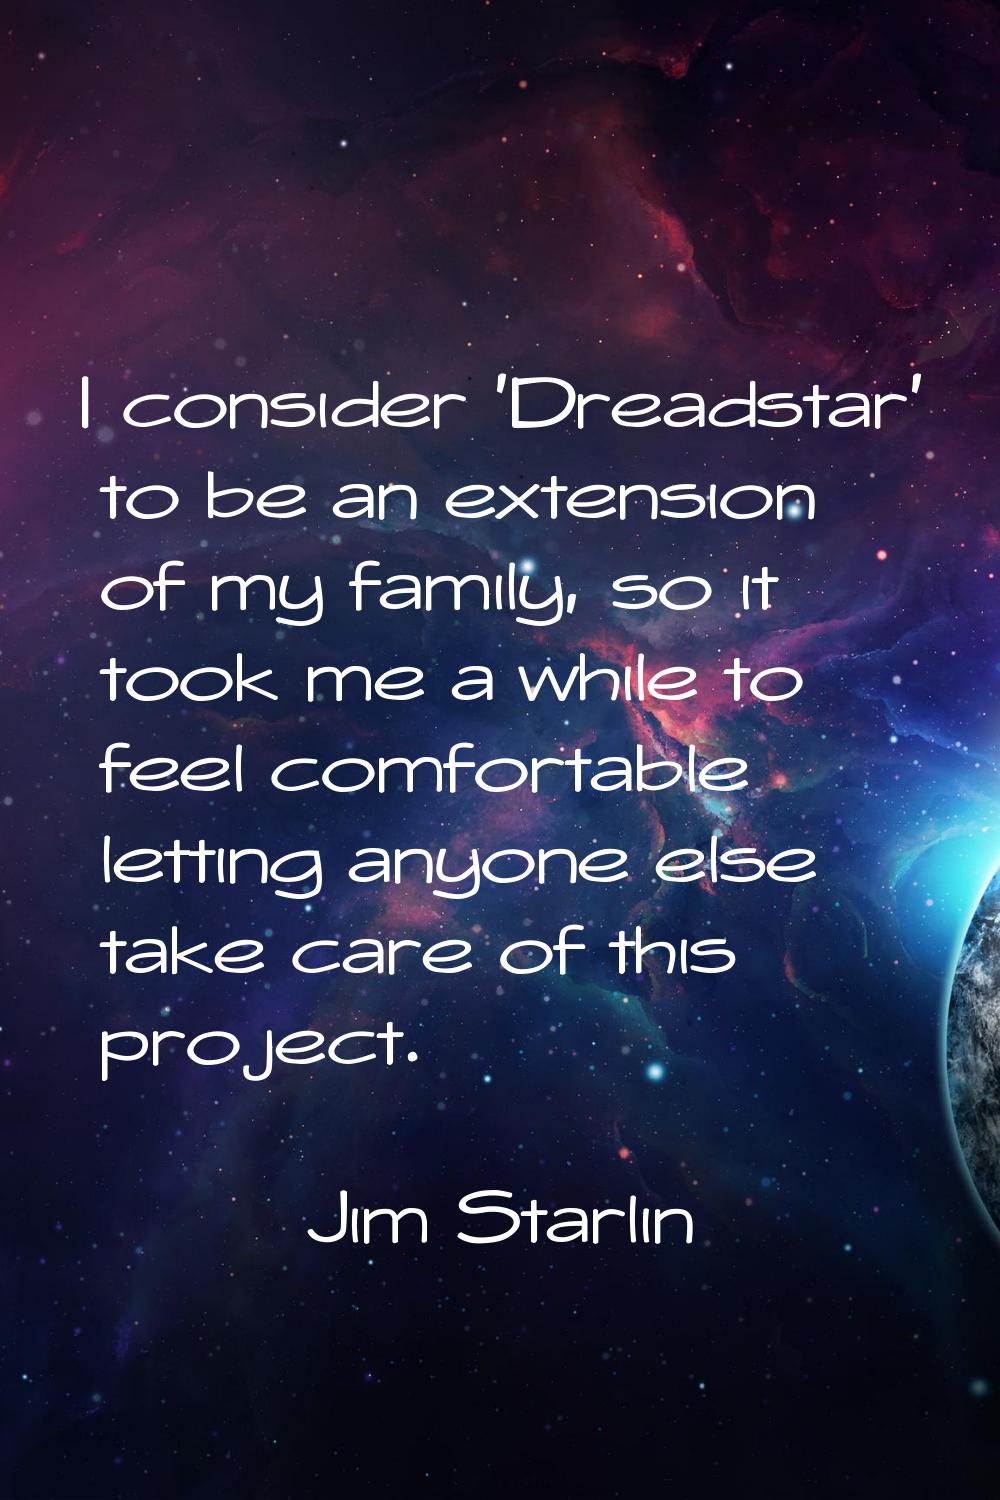 I consider 'Dreadstar' to be an extension of my family, so it took me a while to feel comfortable l